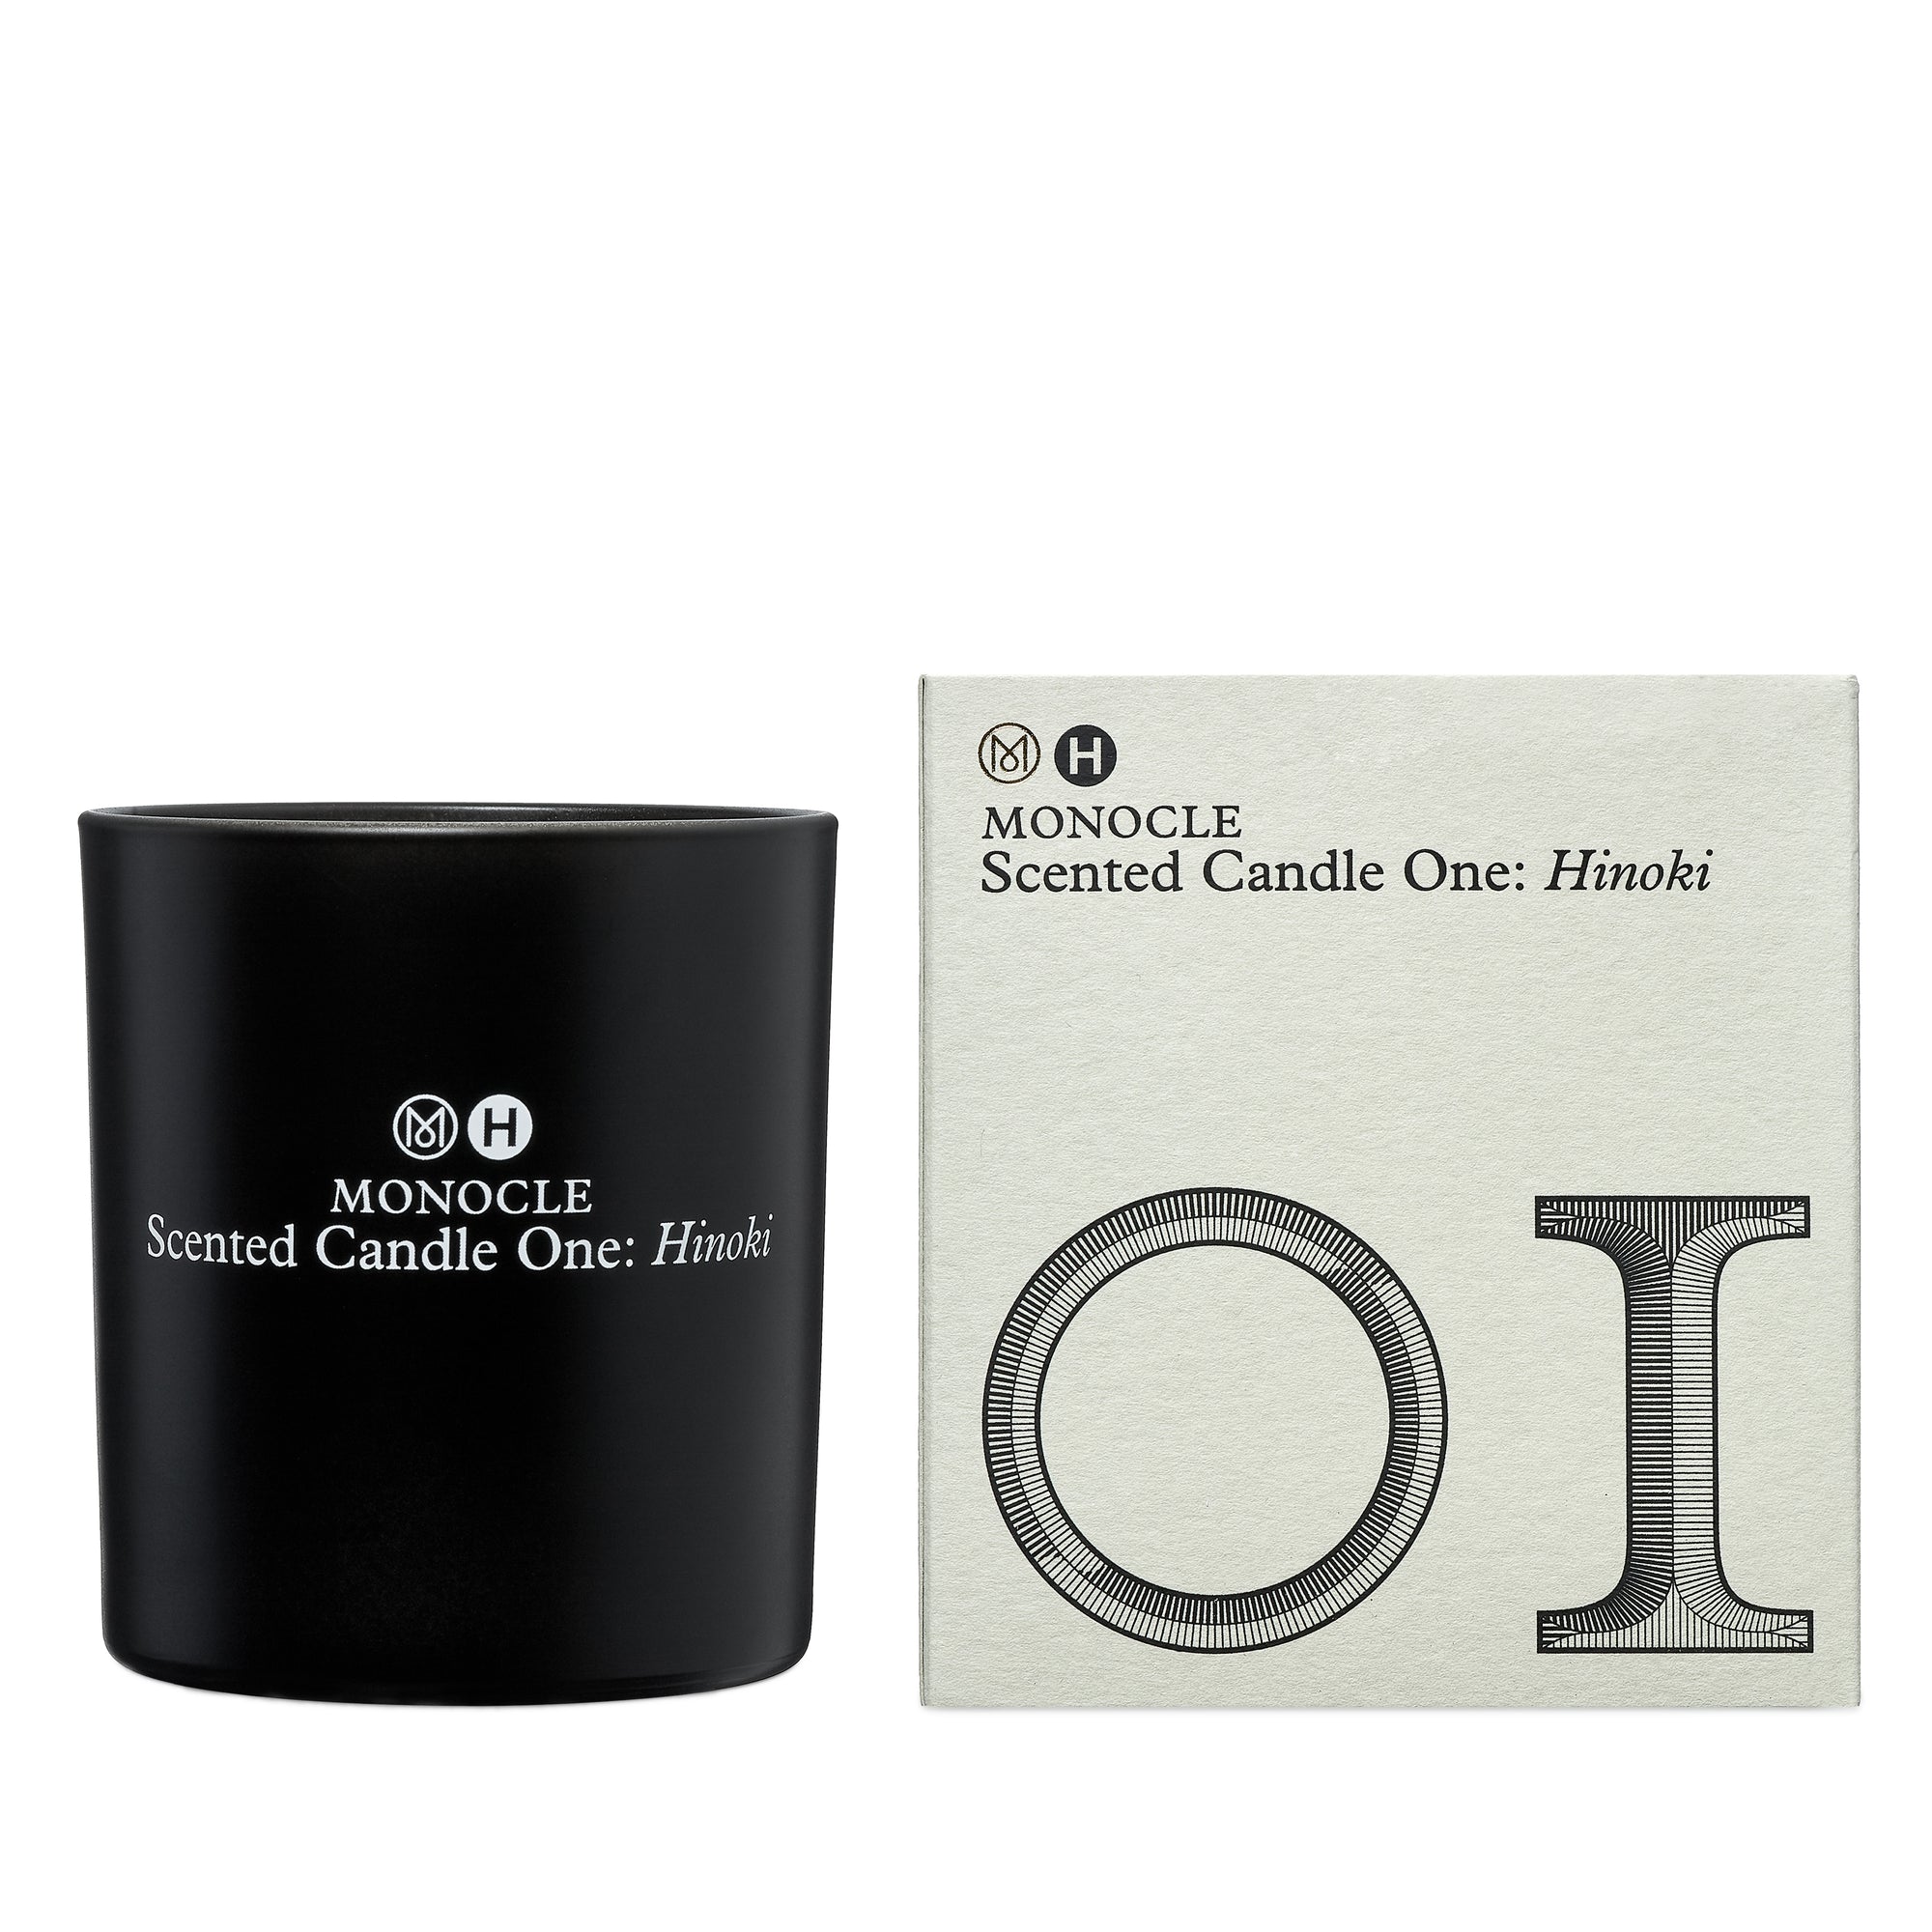 CDG Parfum - Monocle Scented Candle One: Hinoki - (165g) view 2